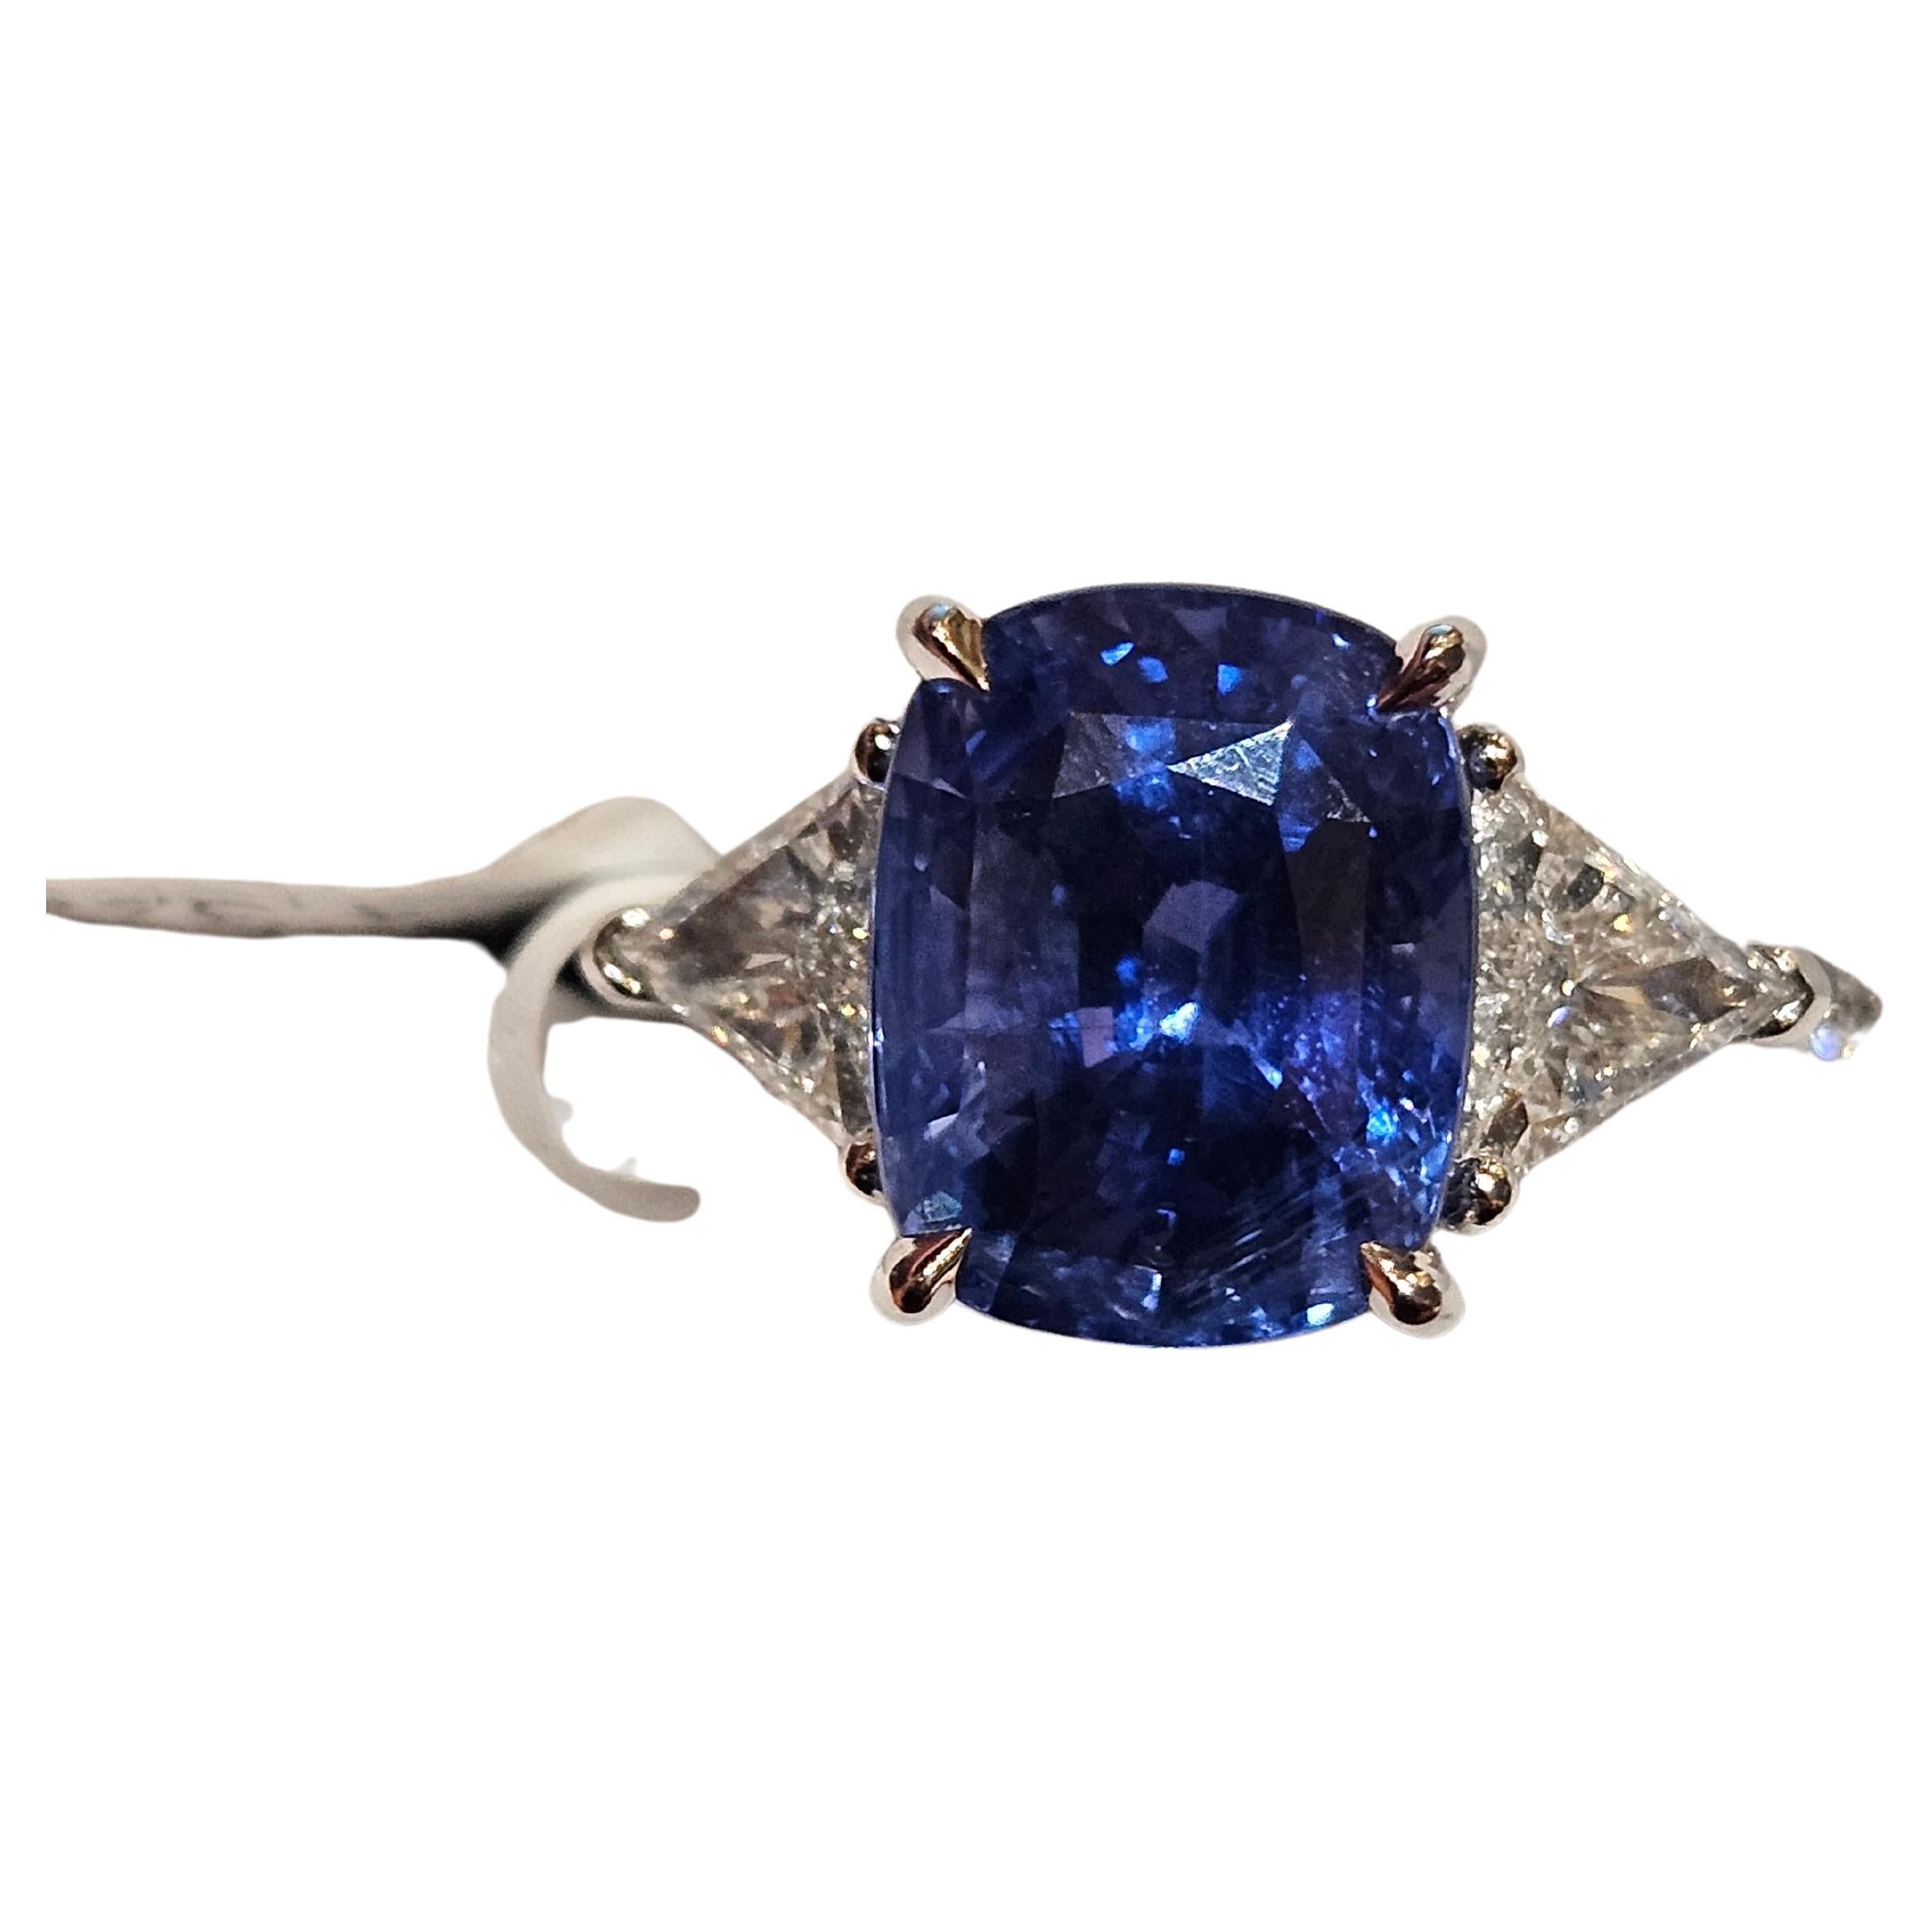 NWT $132, 200 18KT Gold Gorgeous Natural Large Ceylon Blue Sapphire Diamond Ring For Sale